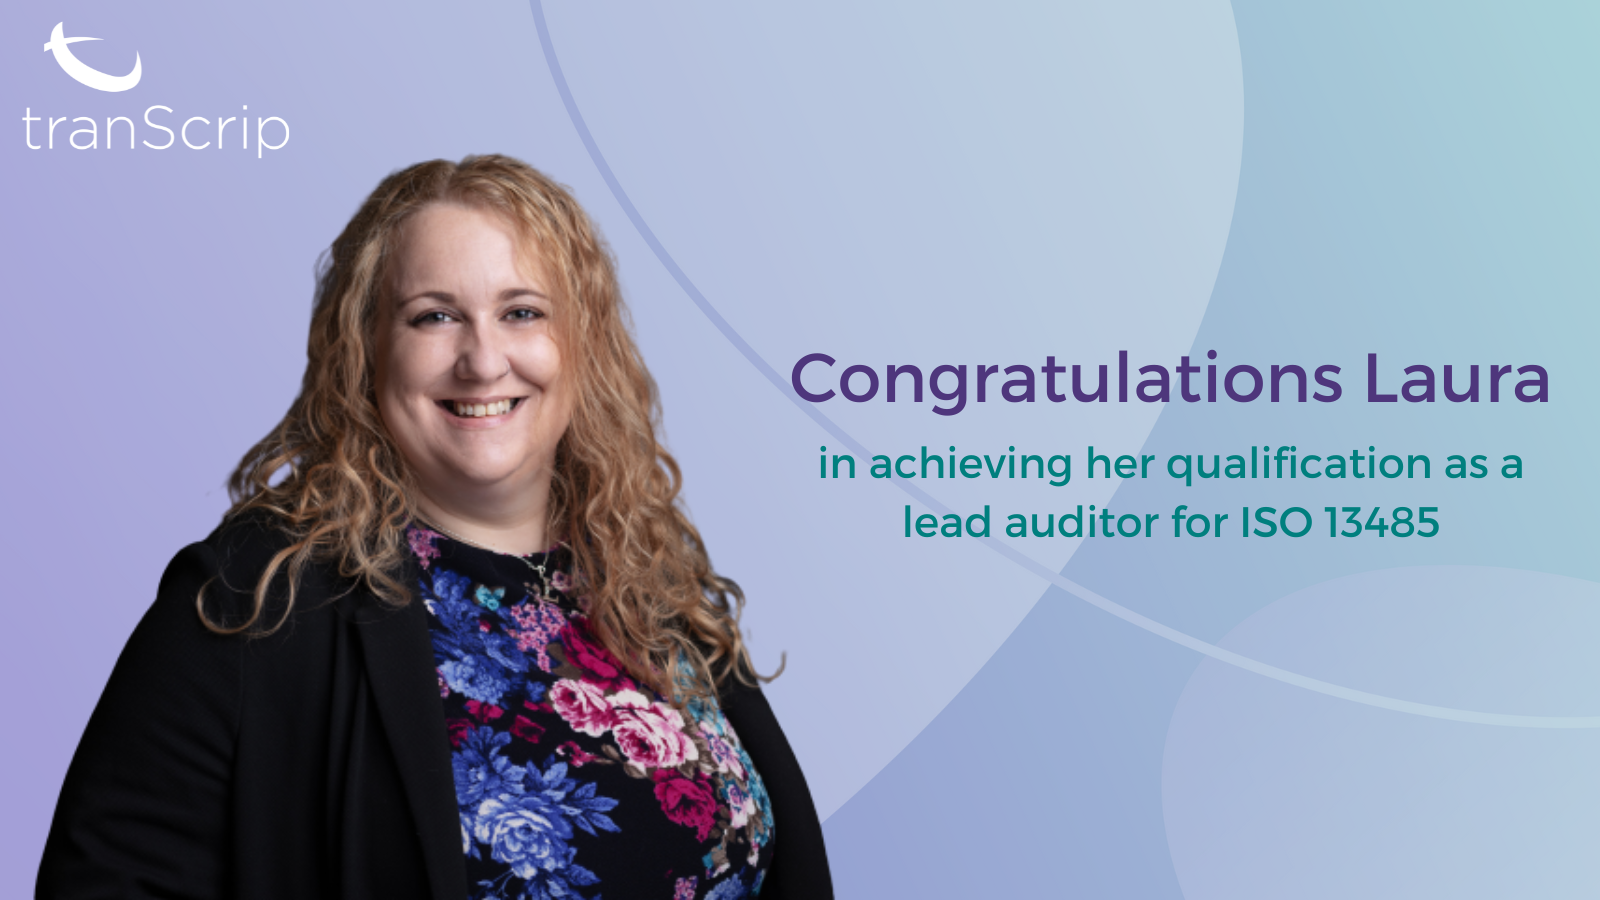 Congratulations to Laura Taylor in achieving her qualification as a lead auditor for ISO 13485 (Medical Device Quality Management Systems).